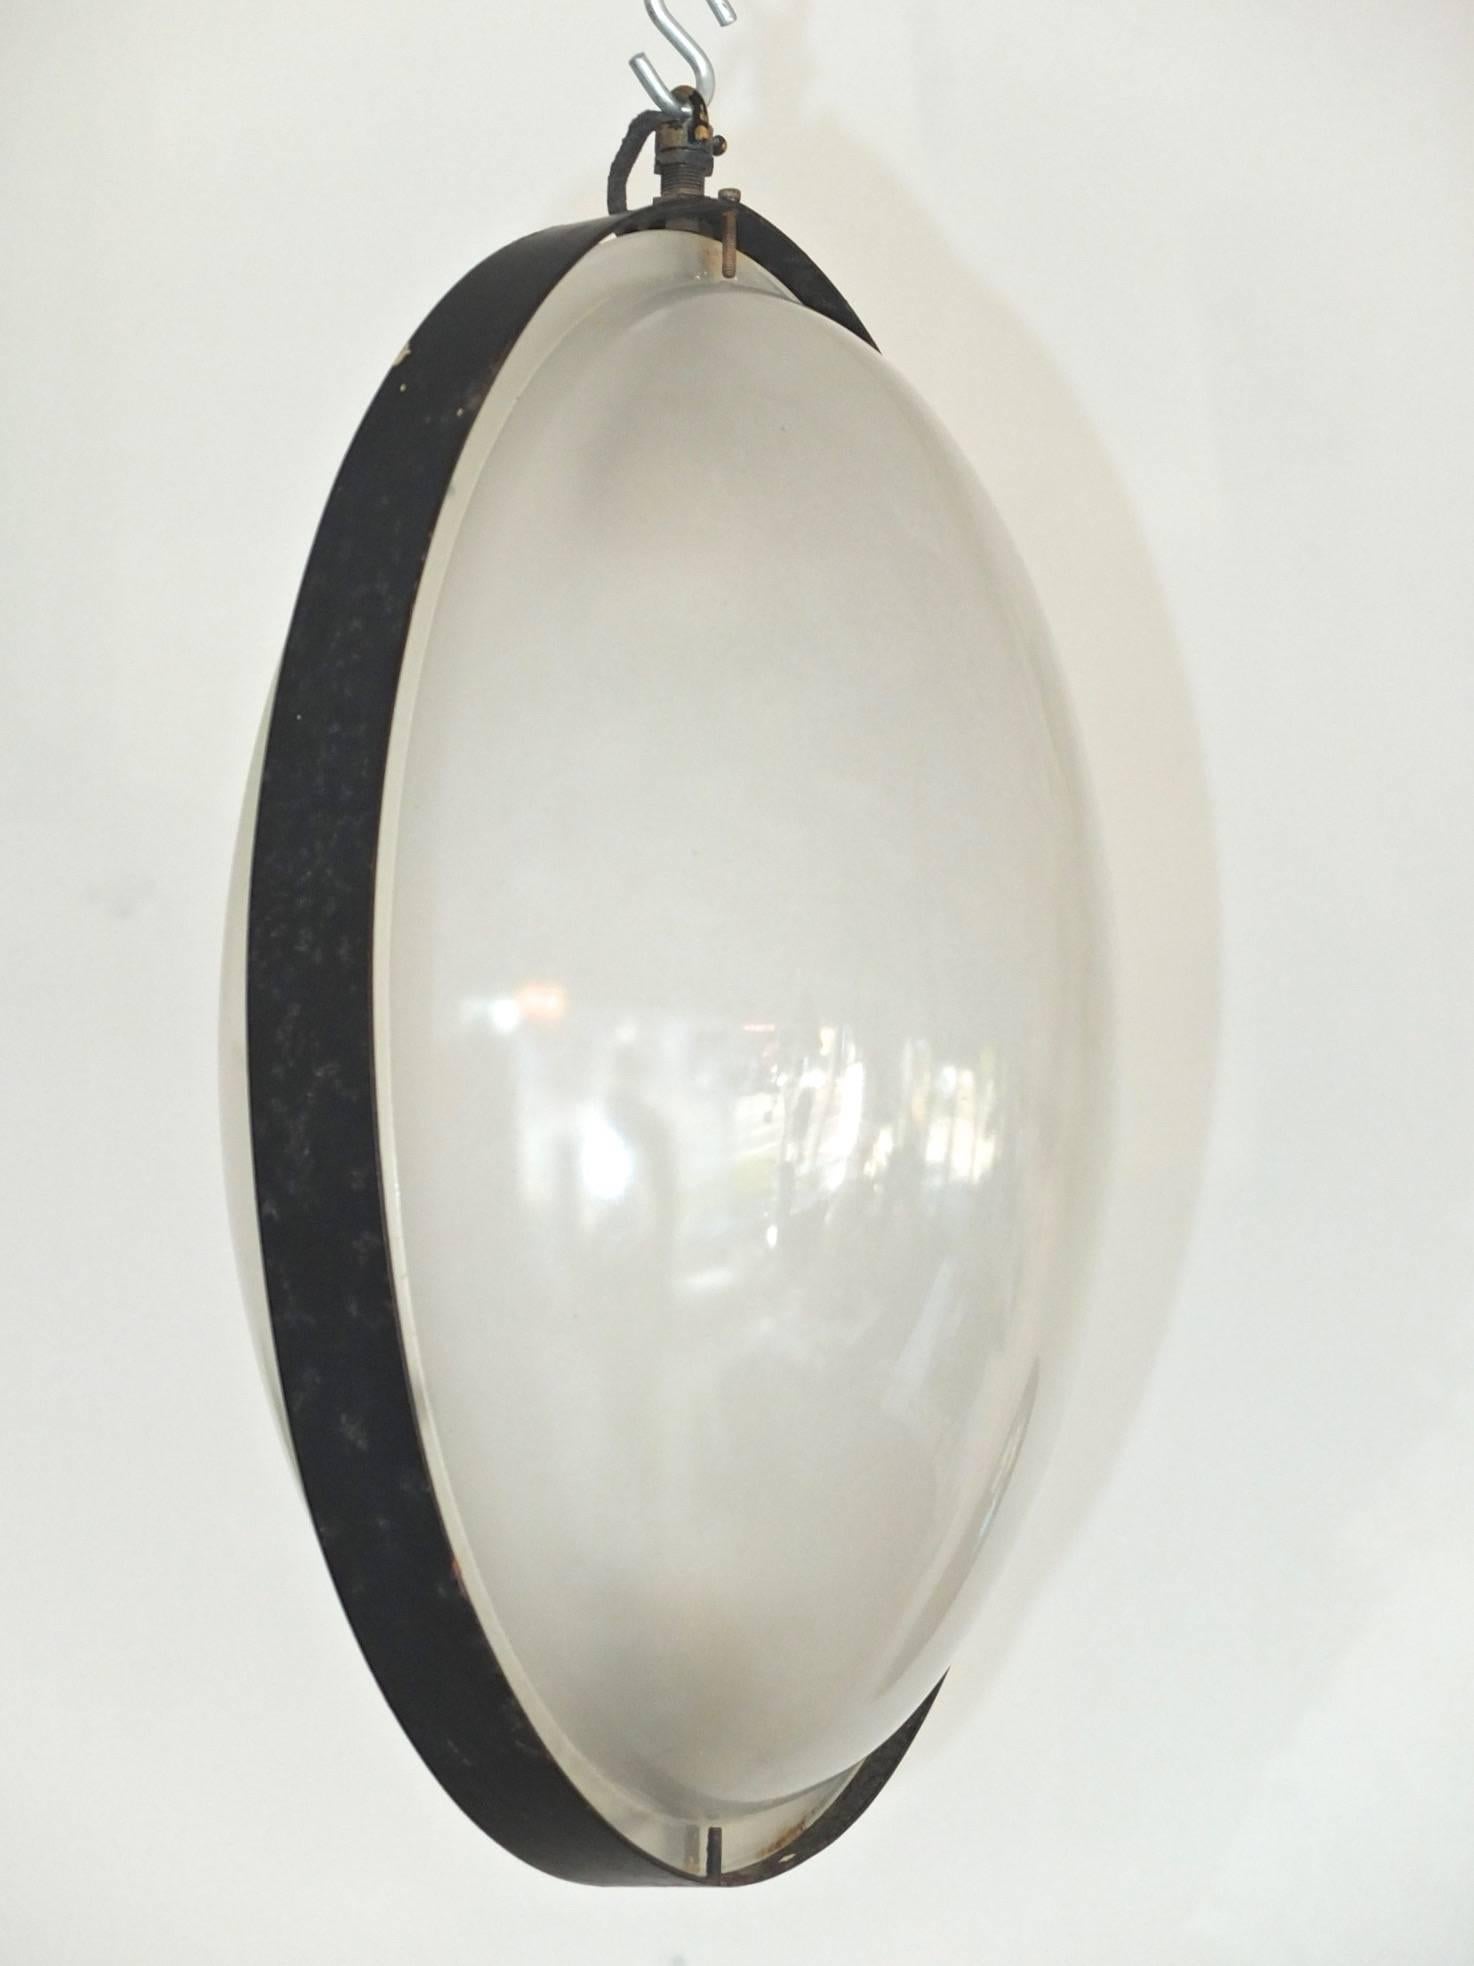 Egg shaped pendant by Stilnovo (signed). The glass lenses are smooth on the outside, lightly textured inside to present as frosted opaque. The glass is in two halves and flanged with a matte black enameled metal band. The yellow Stilnovo label is